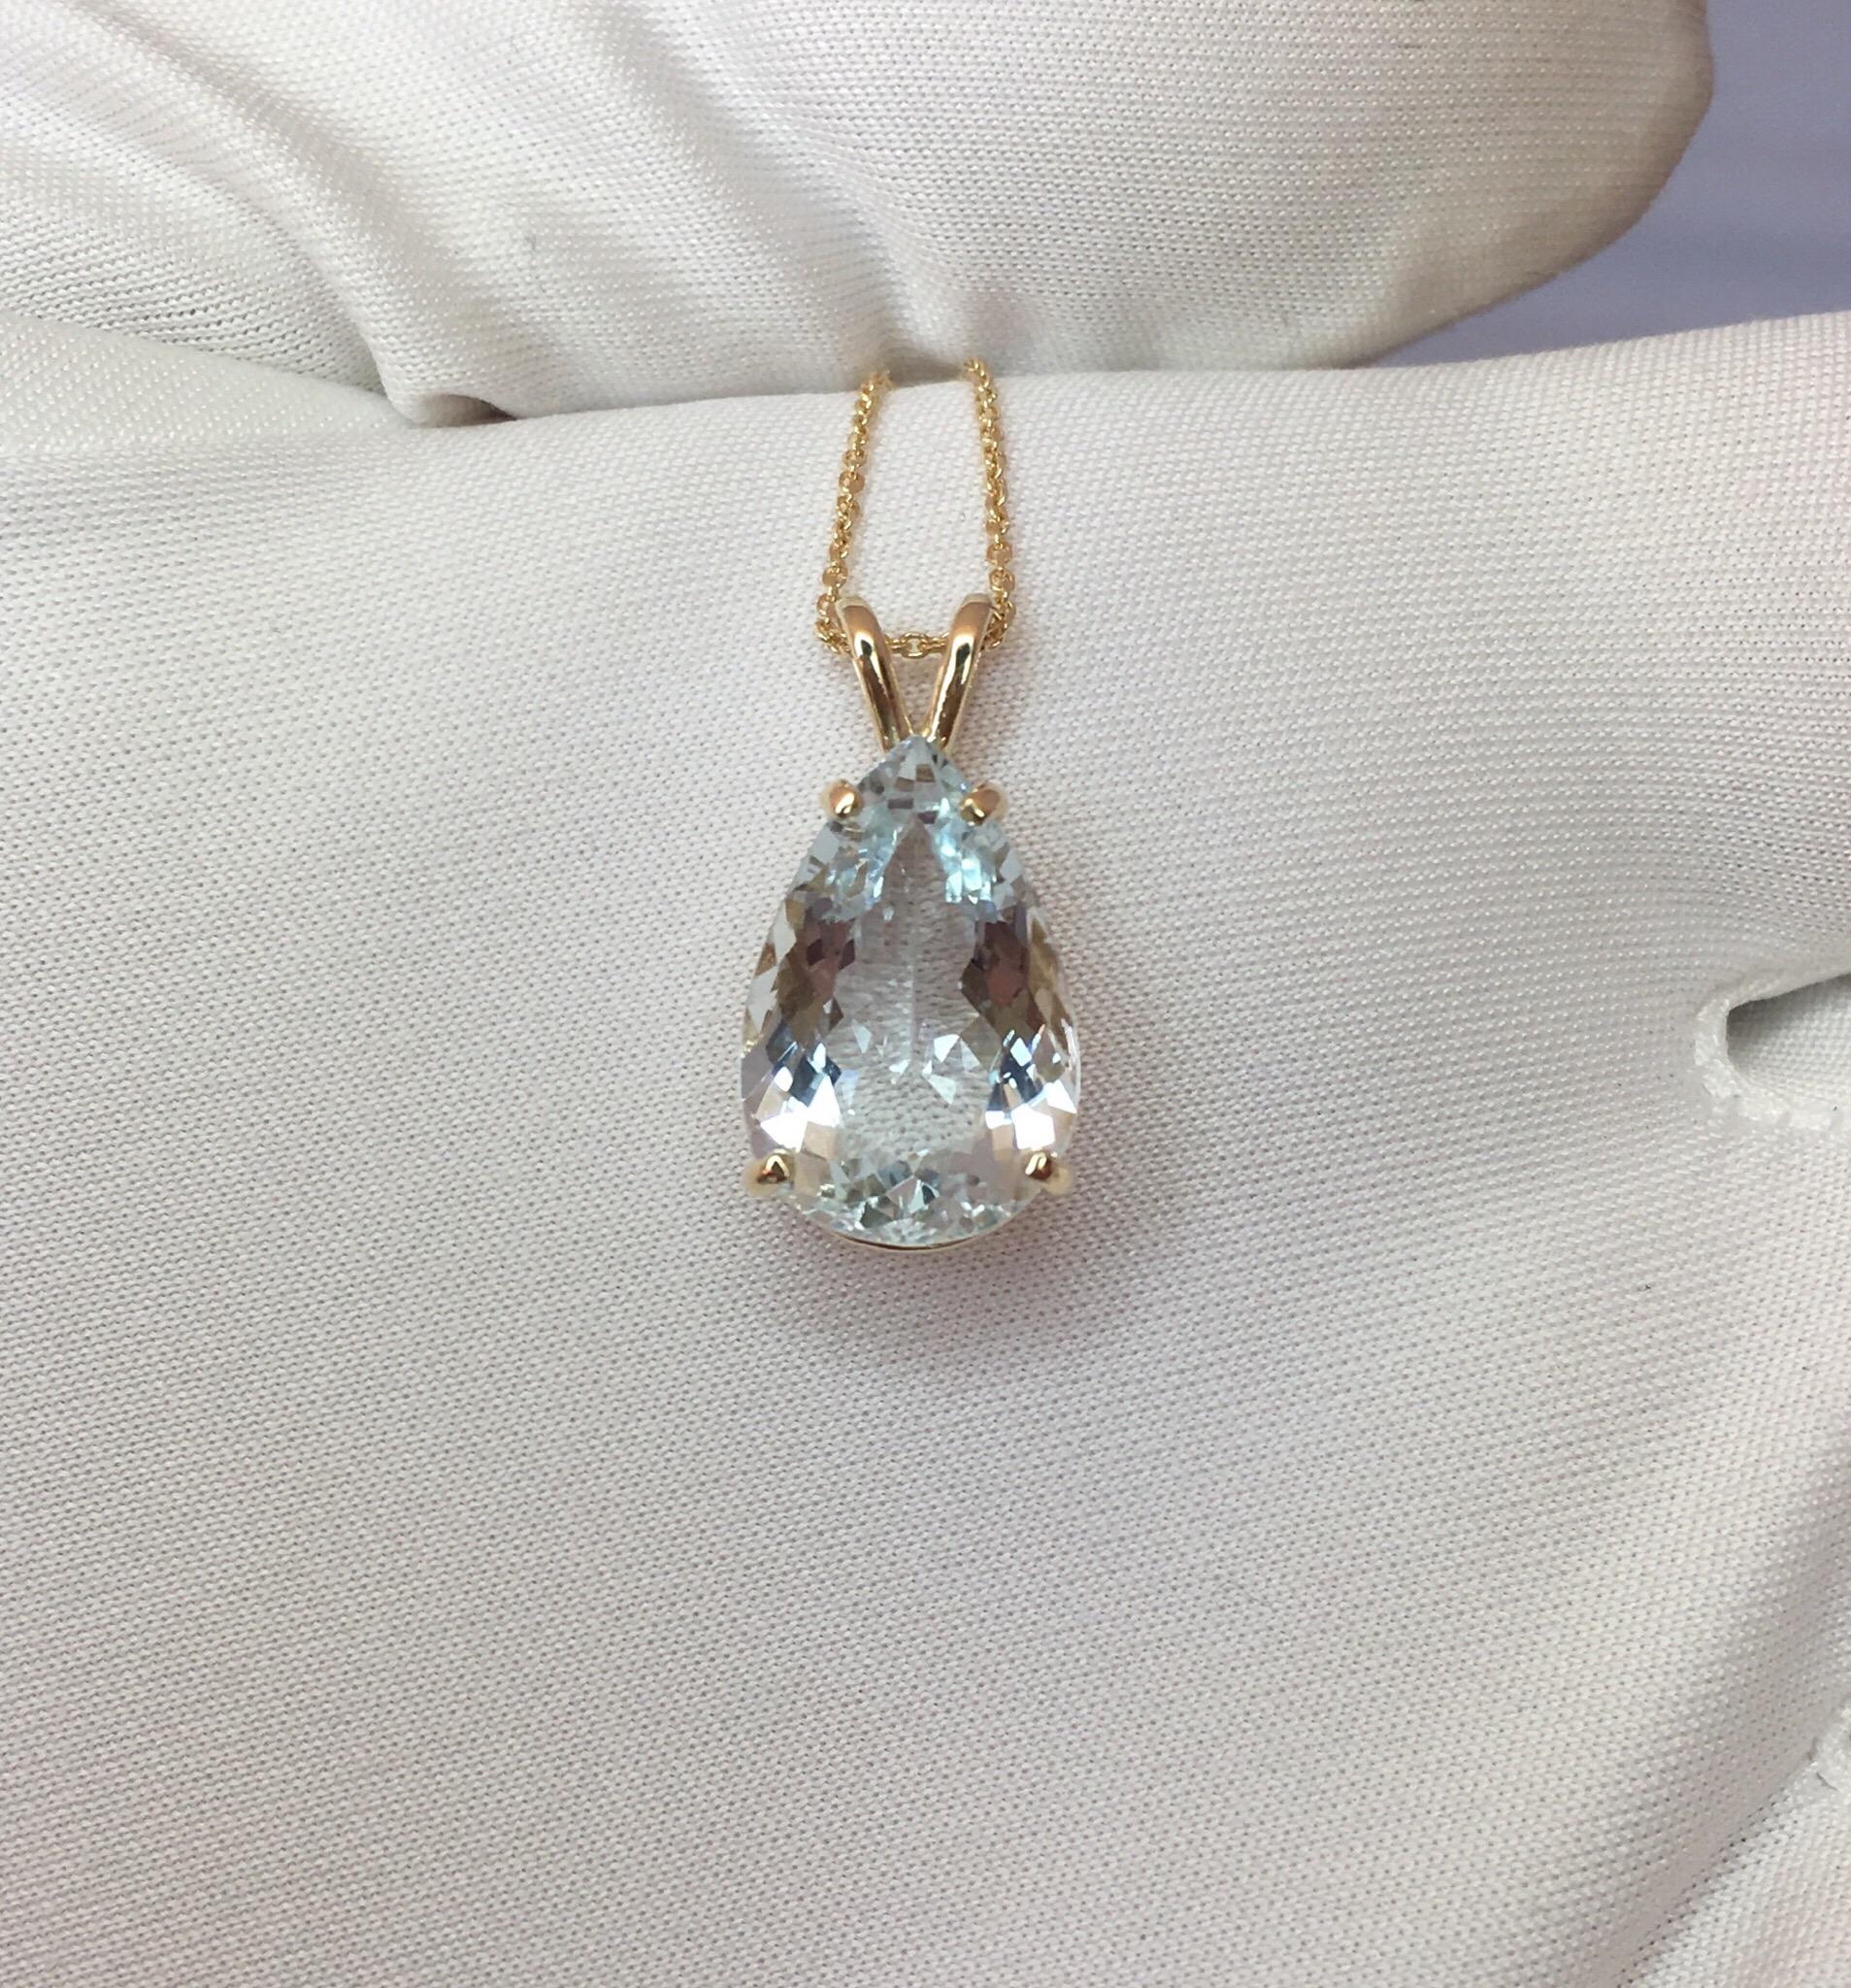 4.34 carat light blue Aquamarine set in a fine 14k yellow gold solitaire pendant.
Excellent clarity, very clean stone.

Also has an excellent pear cut showing lots of brightness and light return. Very sparkly.

Stone measures 14.6x9.7mm

The pendant